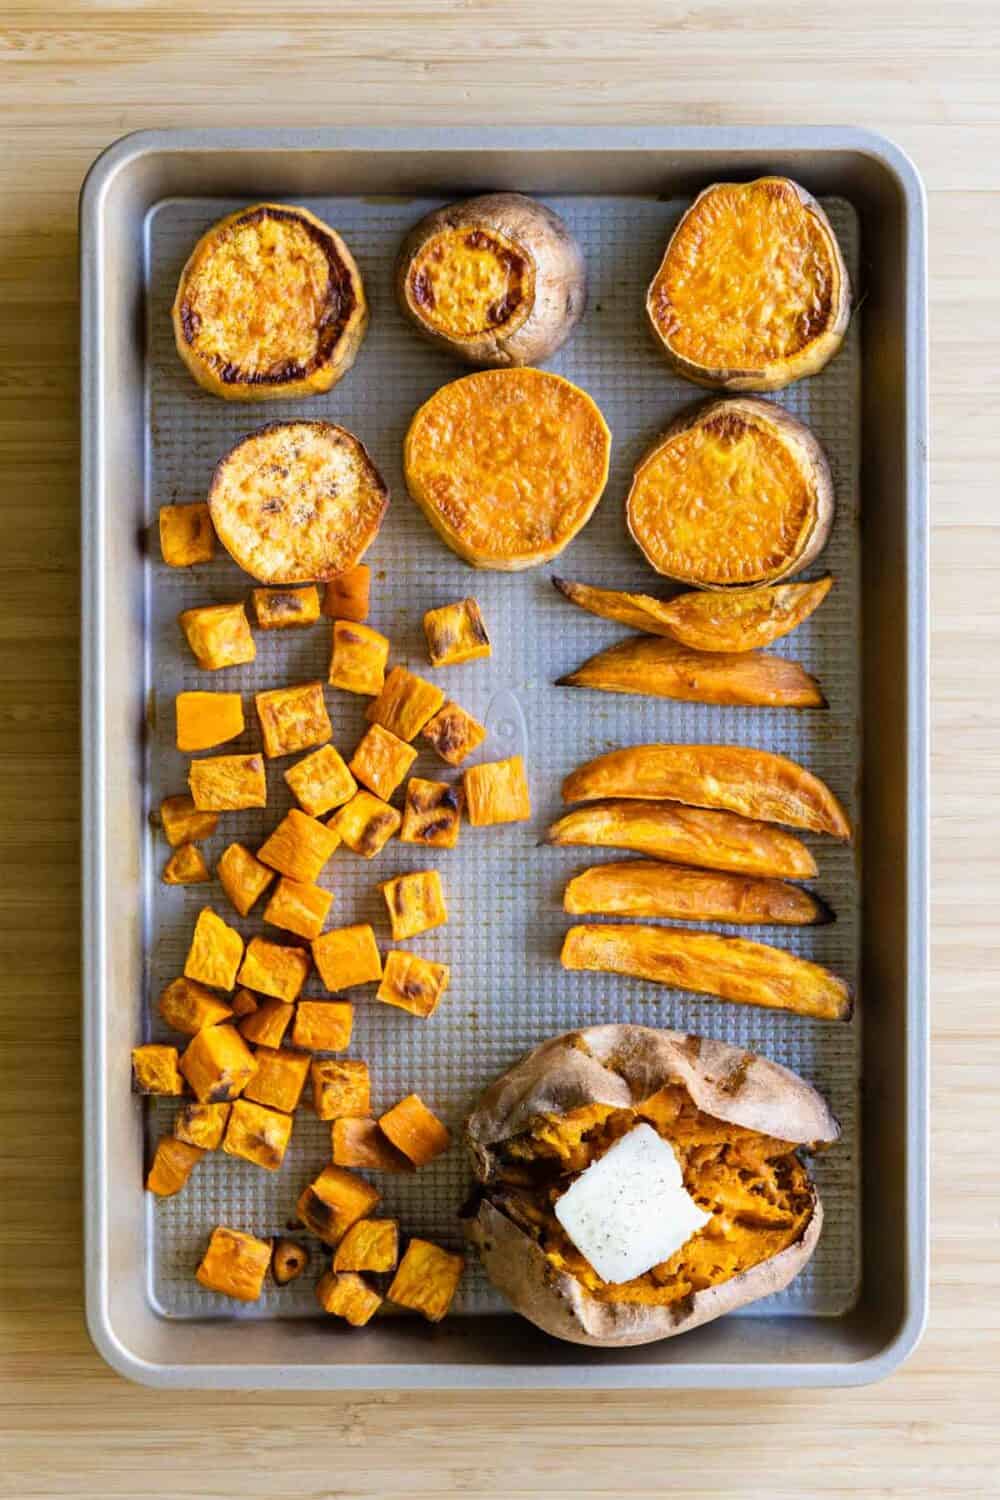 Baked sweet potatoes cut up into rounds, cubes, dice, and as a whole on a baking sheet.